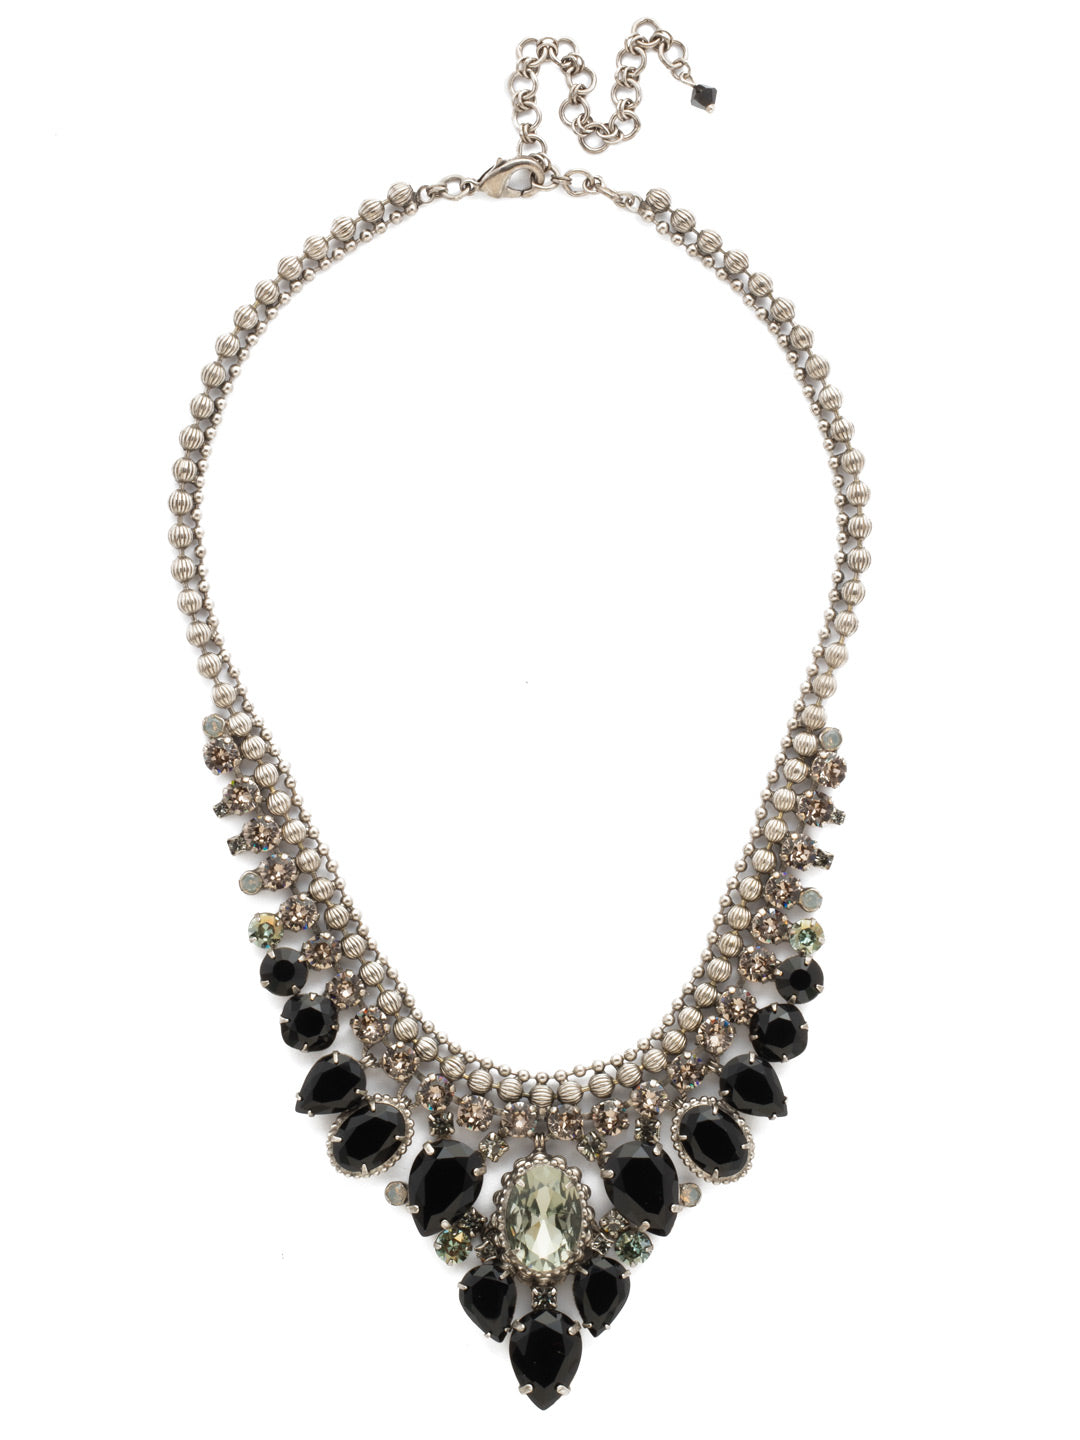 Protea Statement Statement Necklace - NDQ3ASBON - <p>If you feel that bold is better, Protea is the necklace for you! With en elegantly edged chain and crystal for days, this statement-making style pairs perfectly with everything from your favorite party dress to jeans and a sweater! From Sorrelli's Black Onyx collection in our Antique Silver-tone finish.</p>